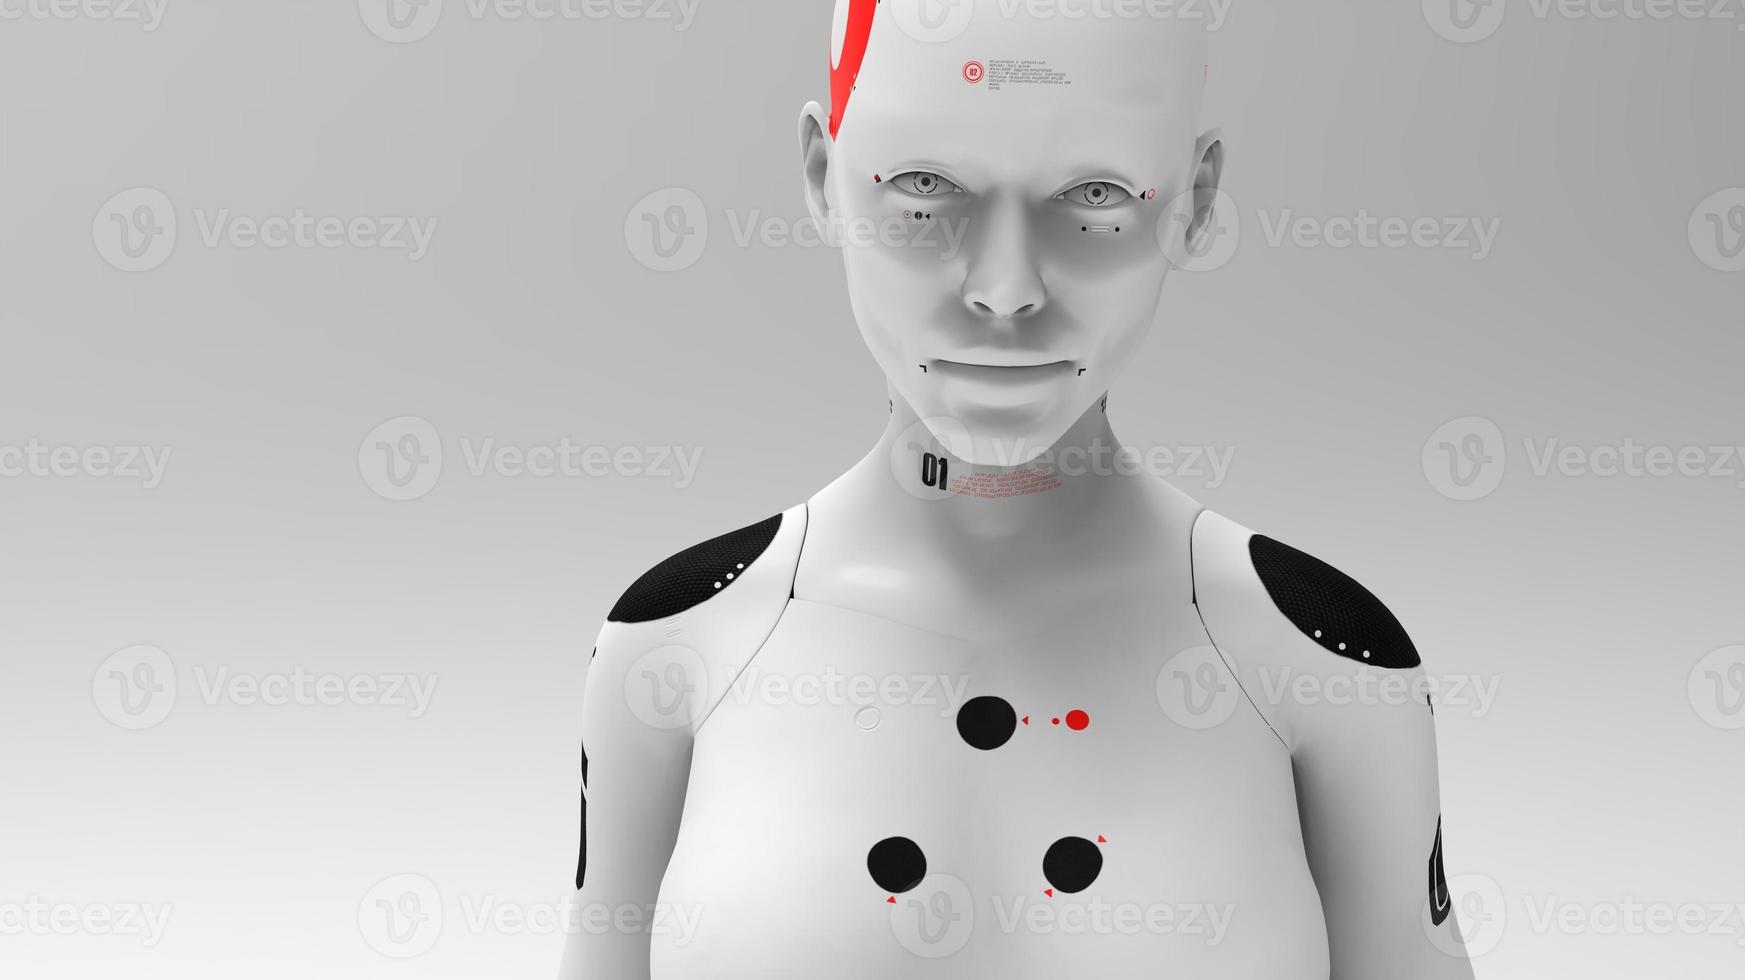 group of robots in female image standing in rows artificial intelligence and robotics concept photo